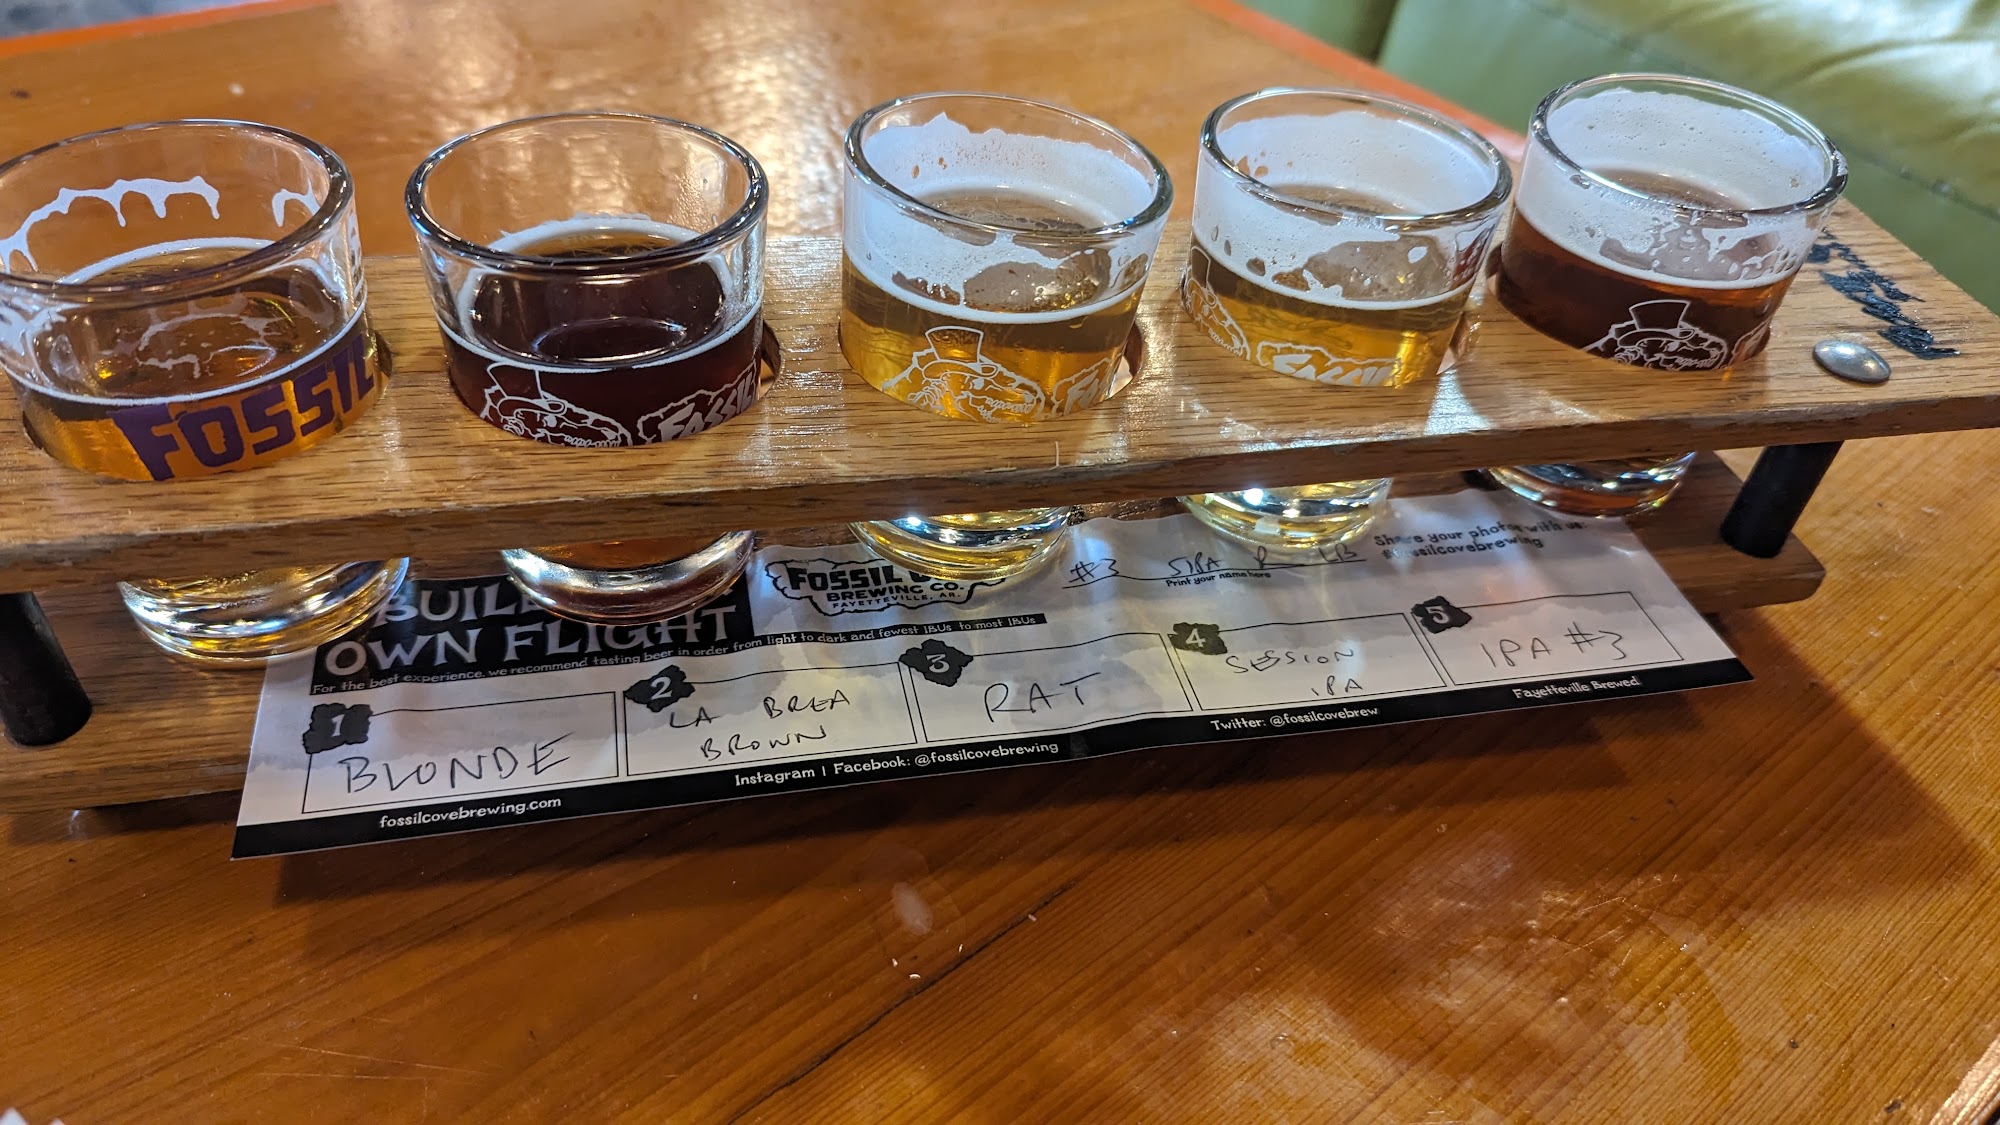 Fossil Cove Brewing Co.